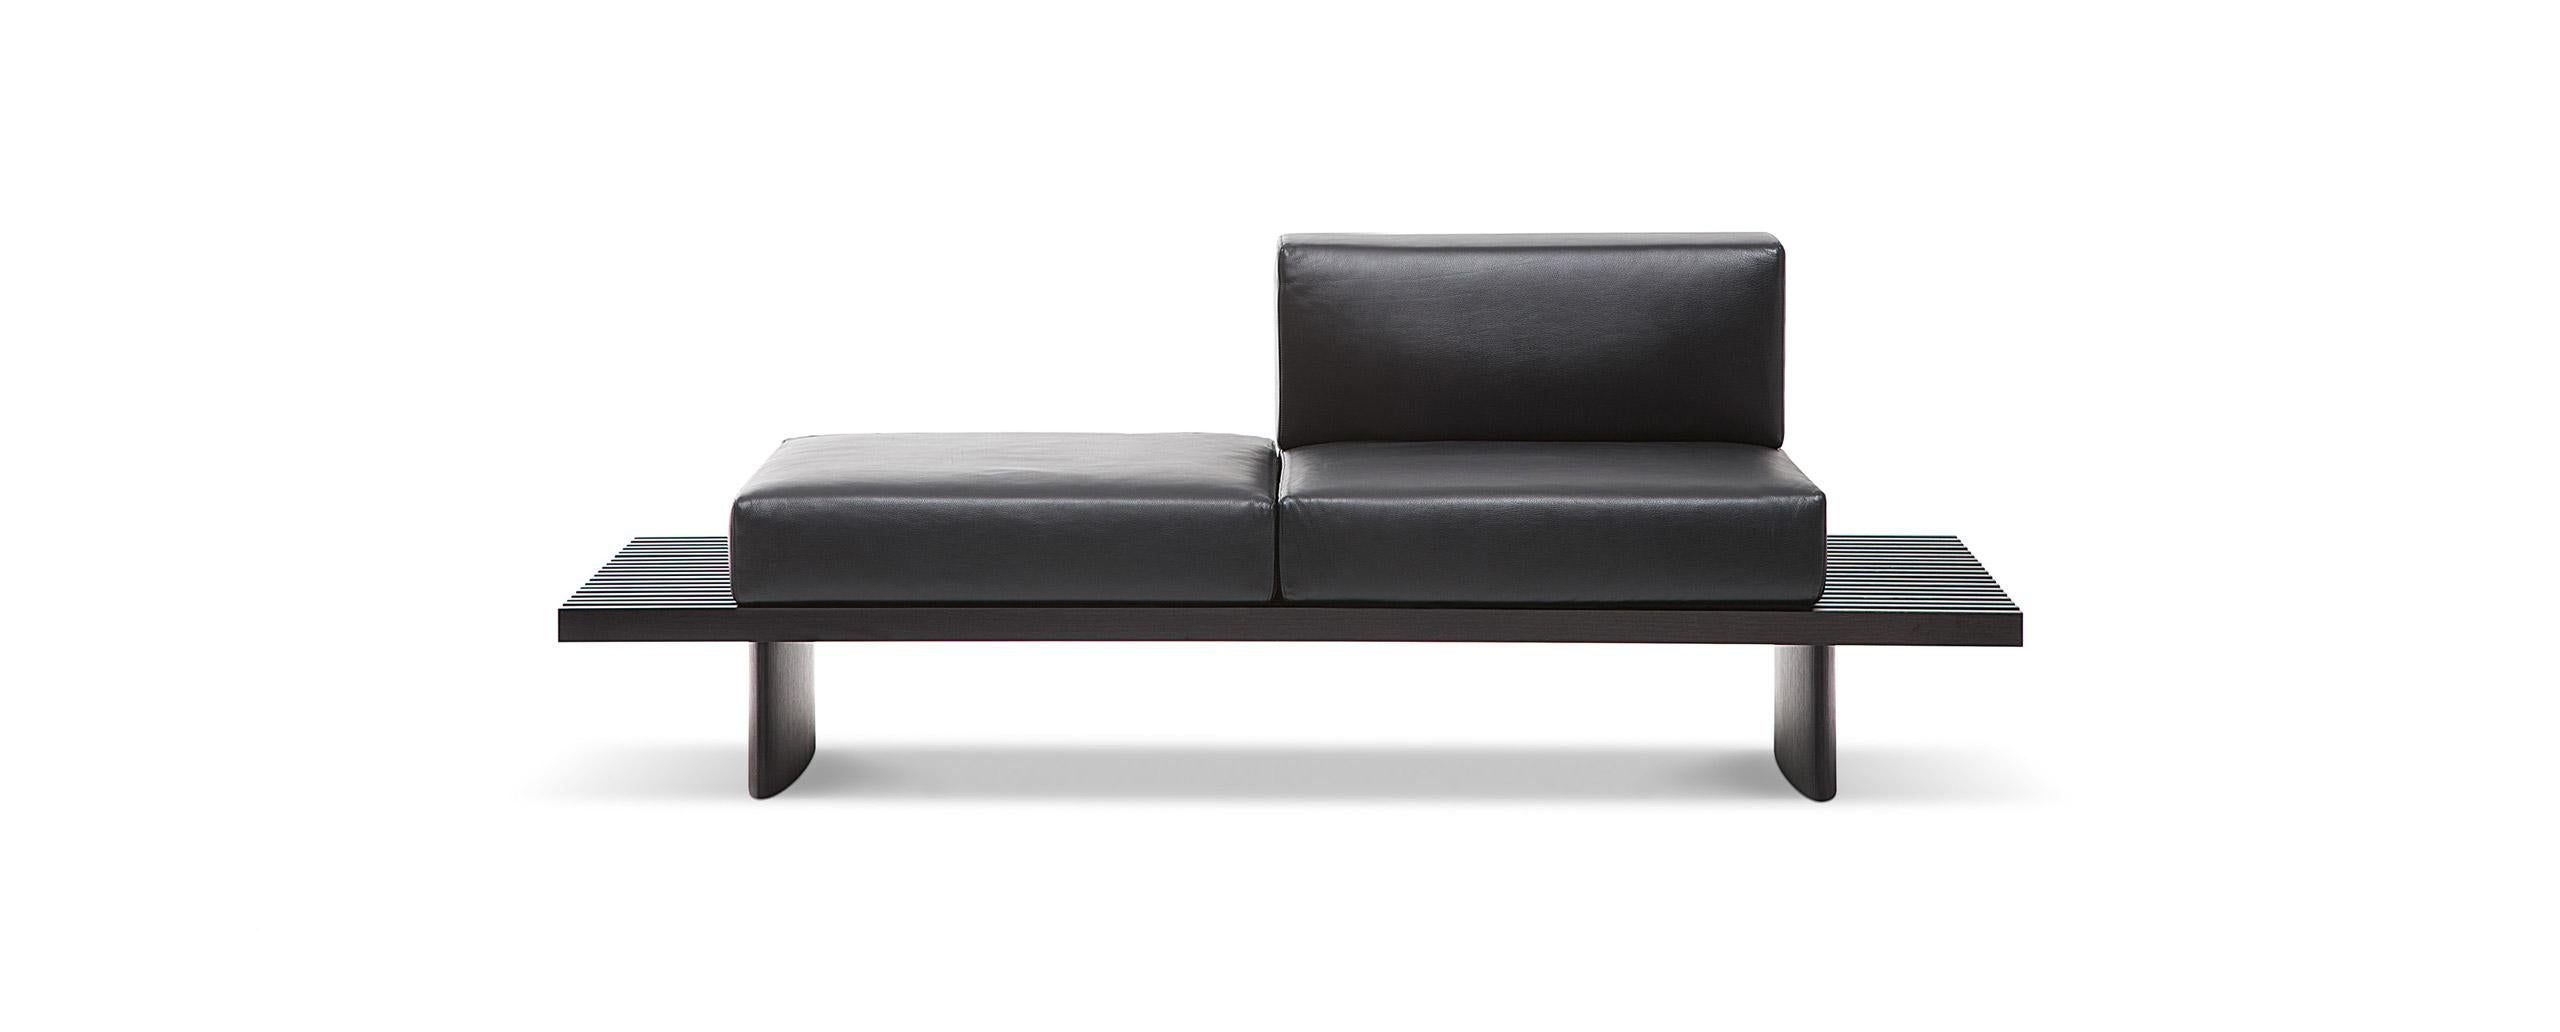 Mid-Century Modern Charlotte Perriand Refolo Modular Sofa, Wood and Black Leather by Cassina